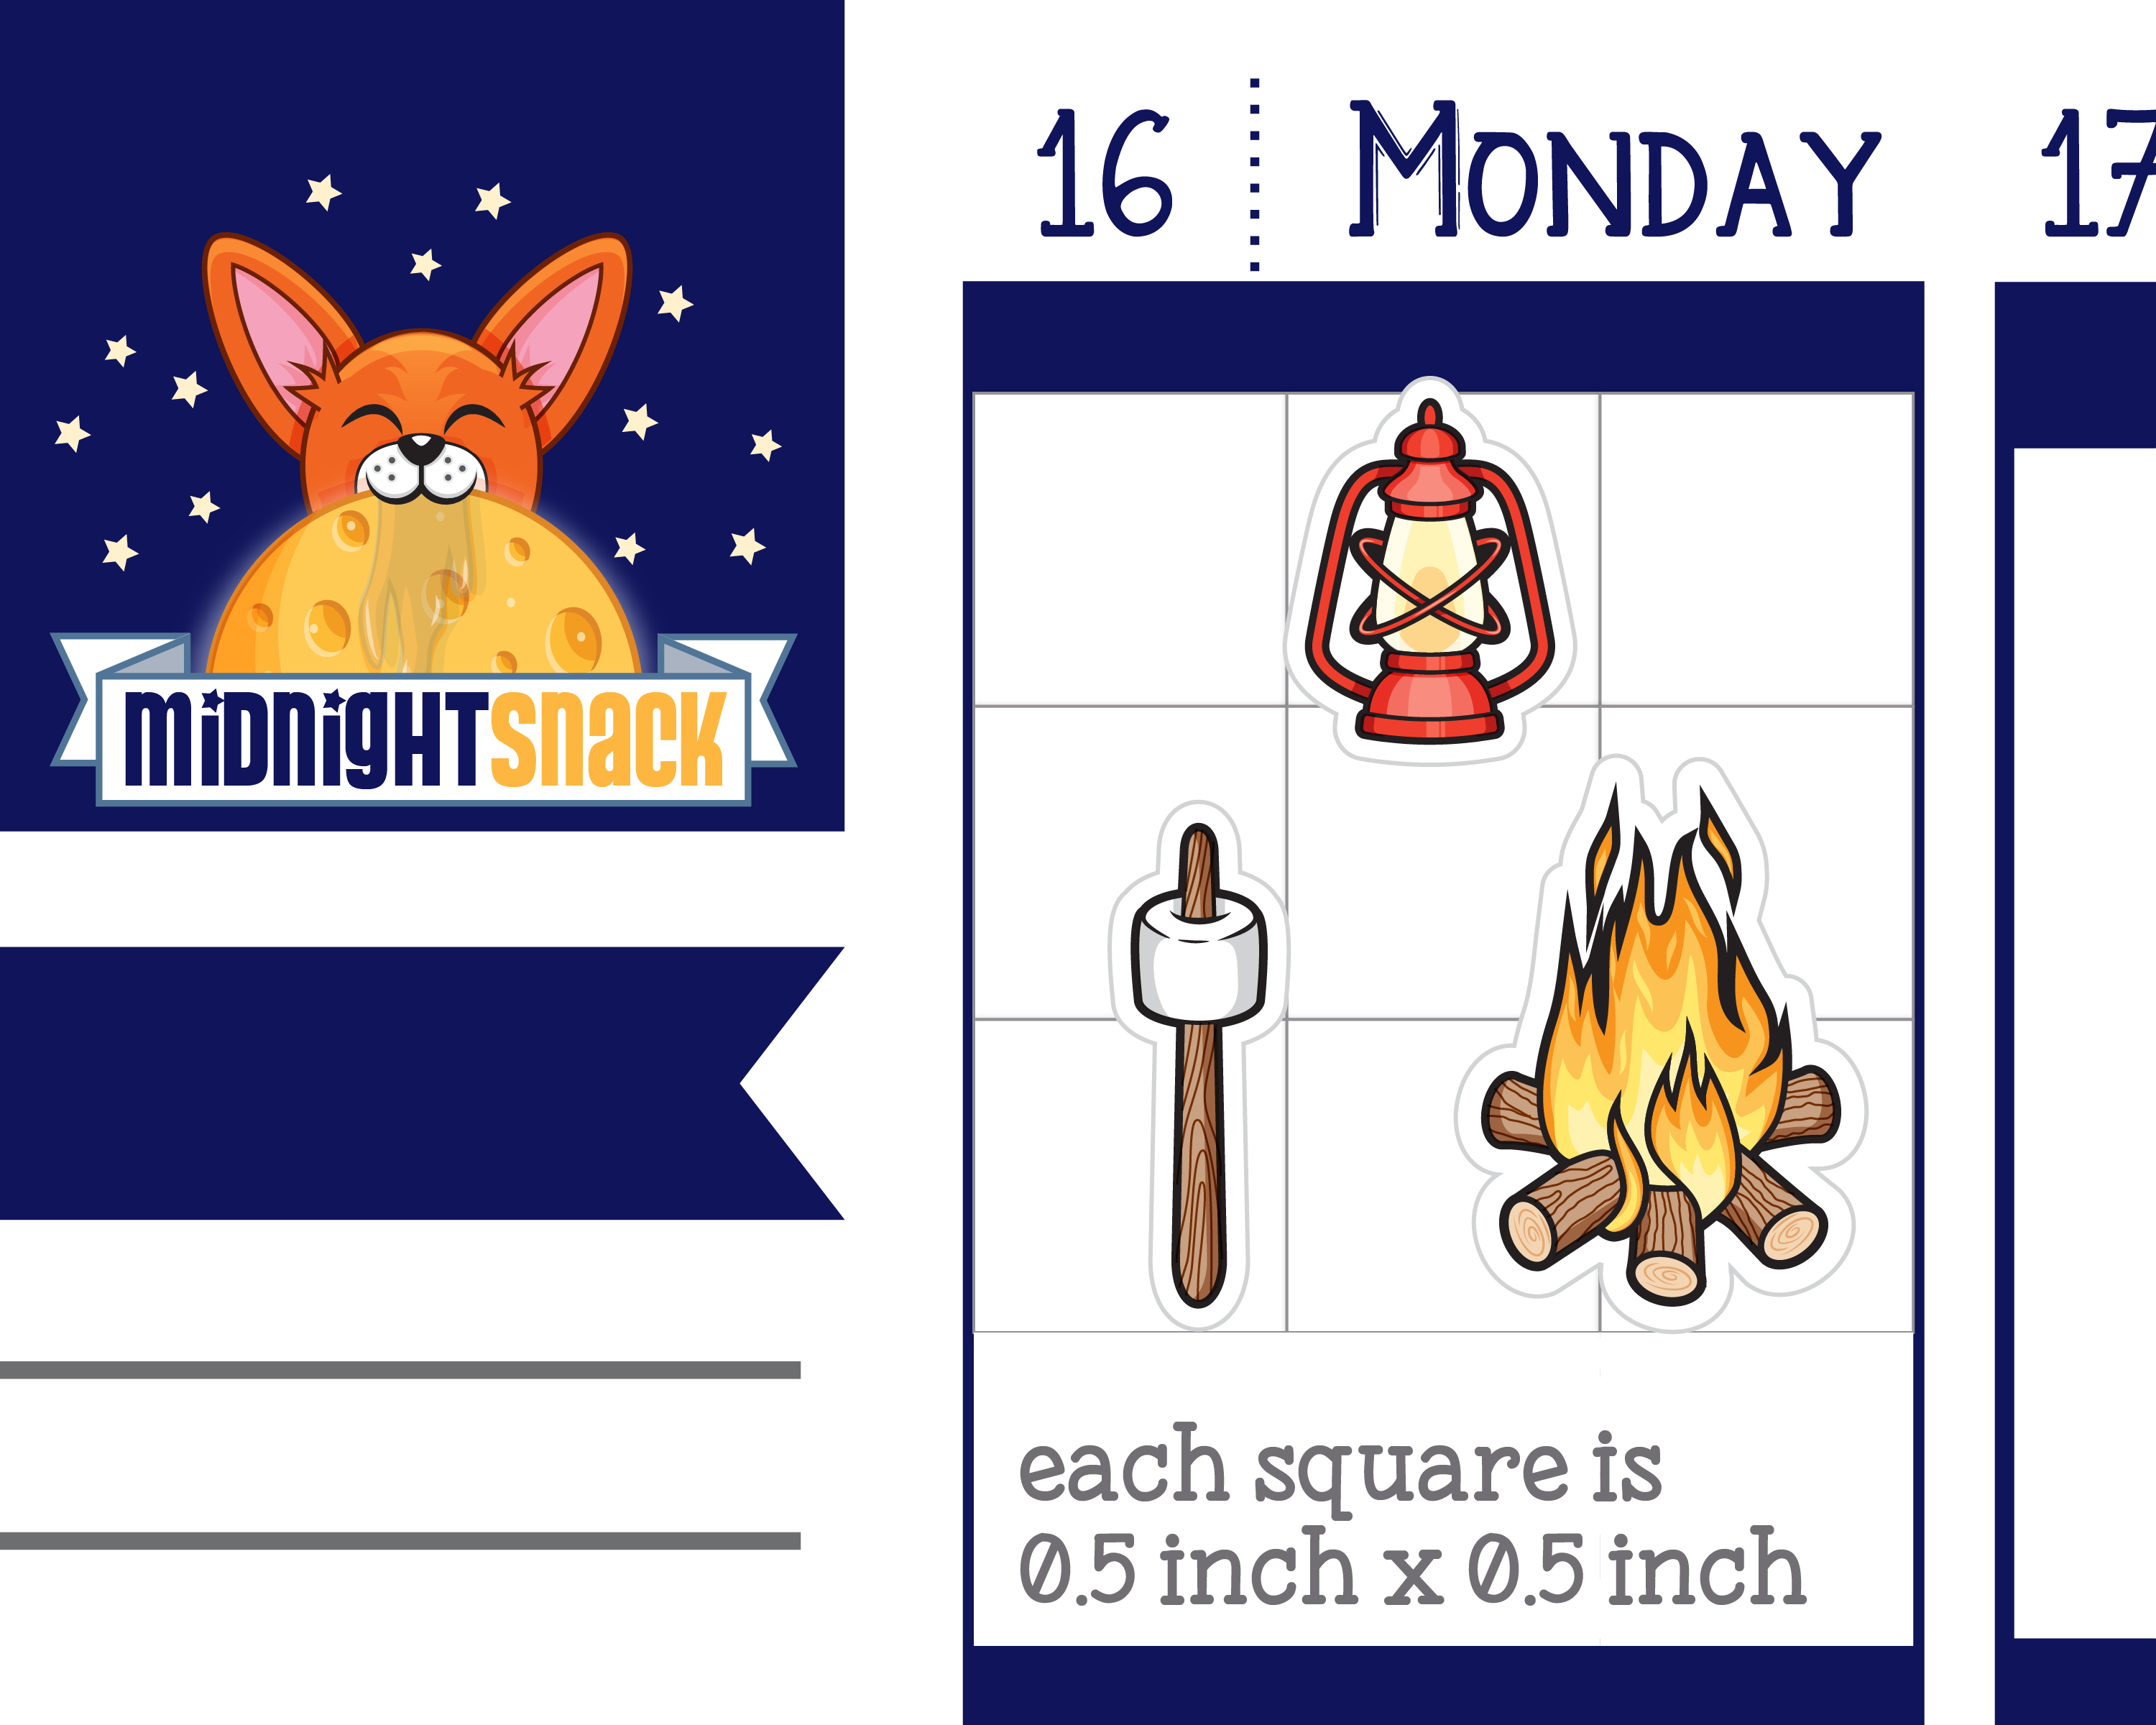 Camping Sampler Icon: Camping Trip Planner Stickers Midnight Snack Planner